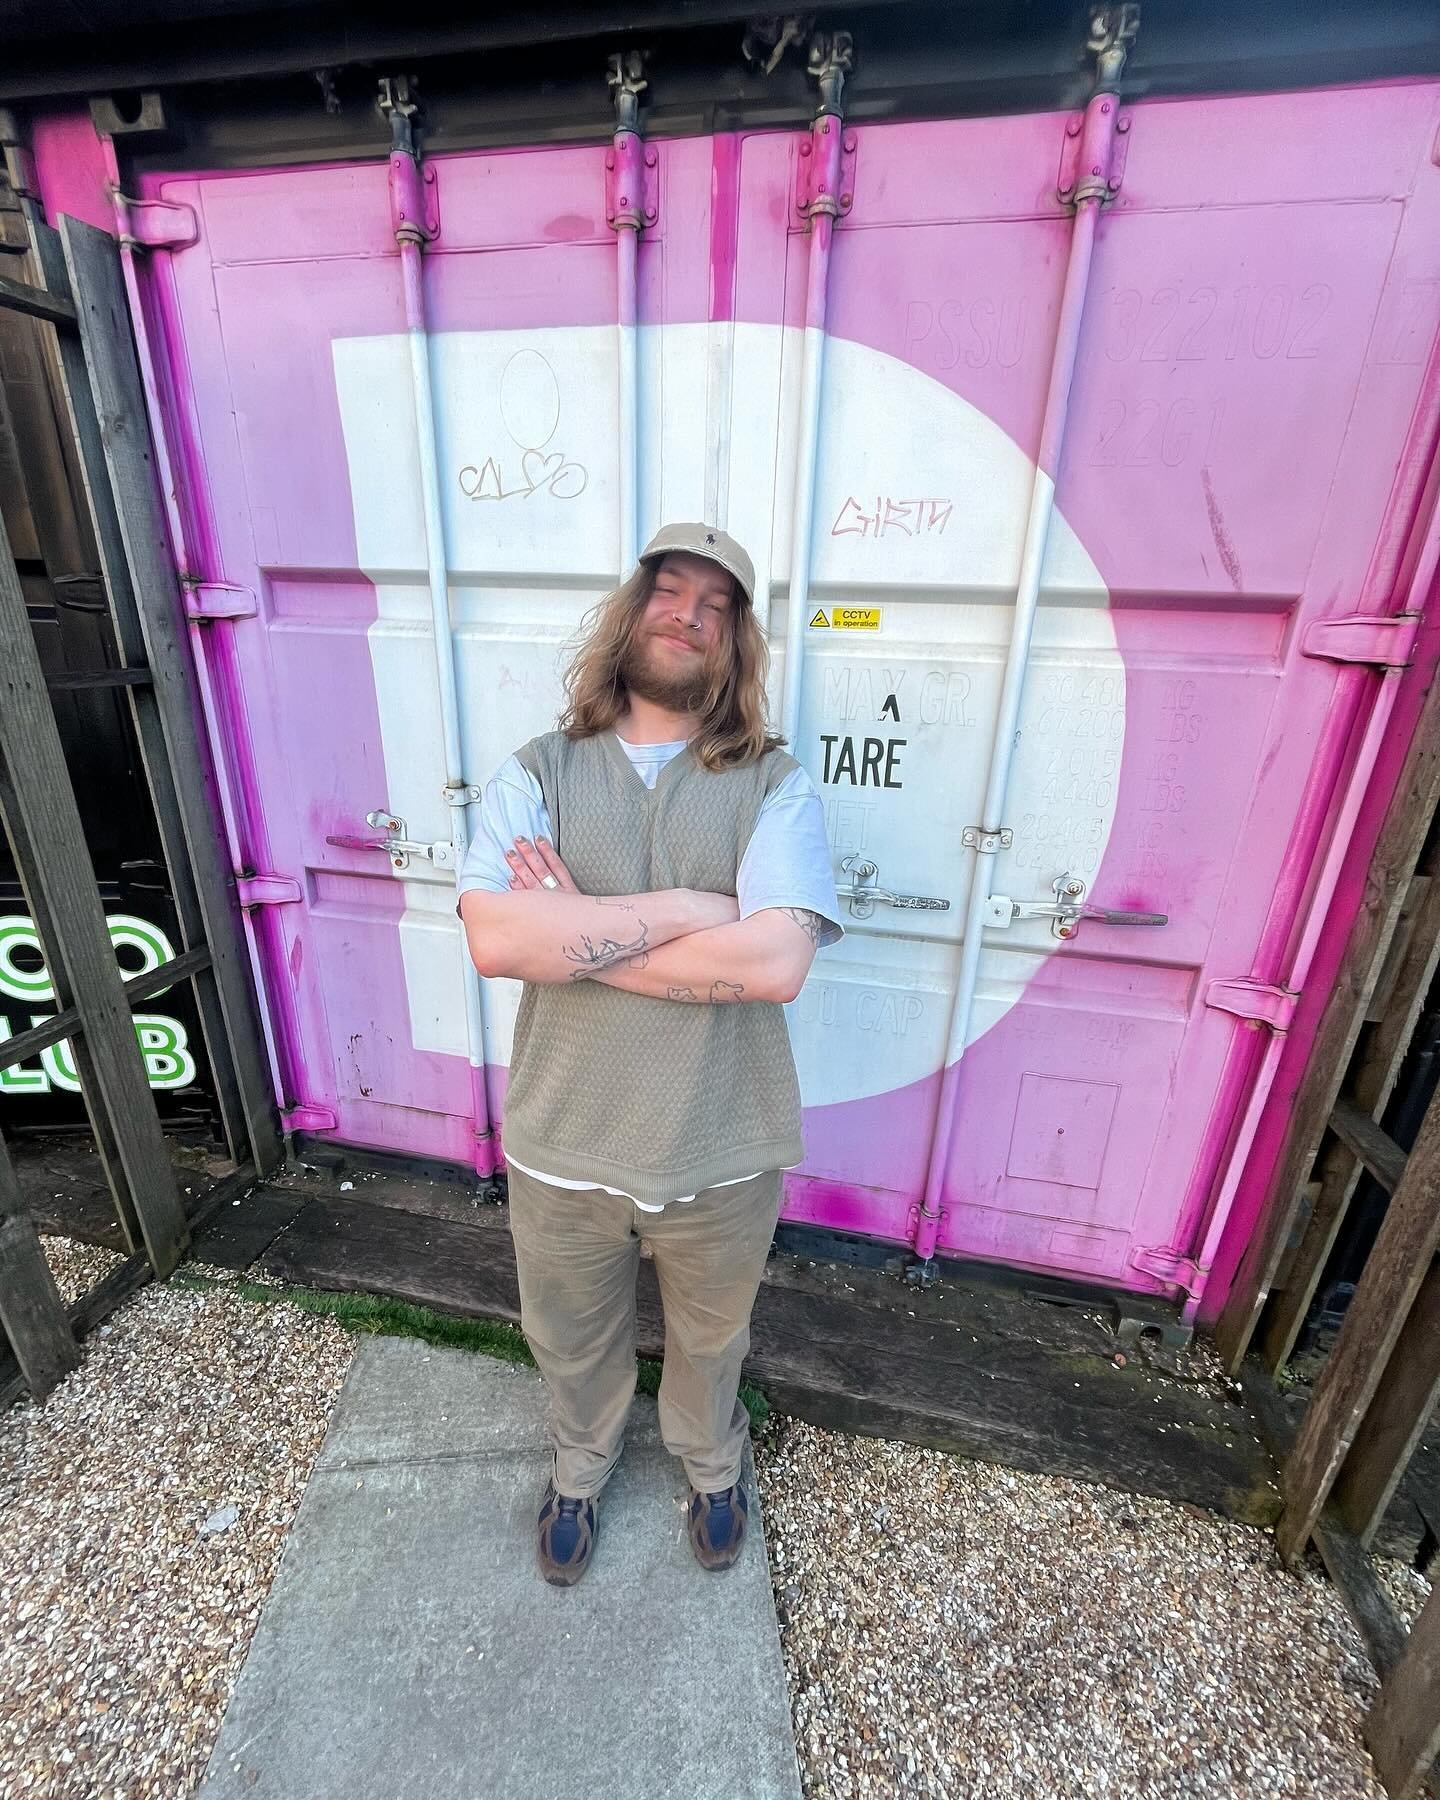 ON AIR NOW: CROSSING PATHS w/ @ar.thuratchi 🚸Bringing you Indie, Alt Country &amp; Dream pop &lsquo;TIL 8PM ft. Tracks from Devon Welsh, @songofcoco &amp; @sports_coach_69 🔒 Keep it locked in at 105.5FM - platformb.org.uk - DAB 🔒